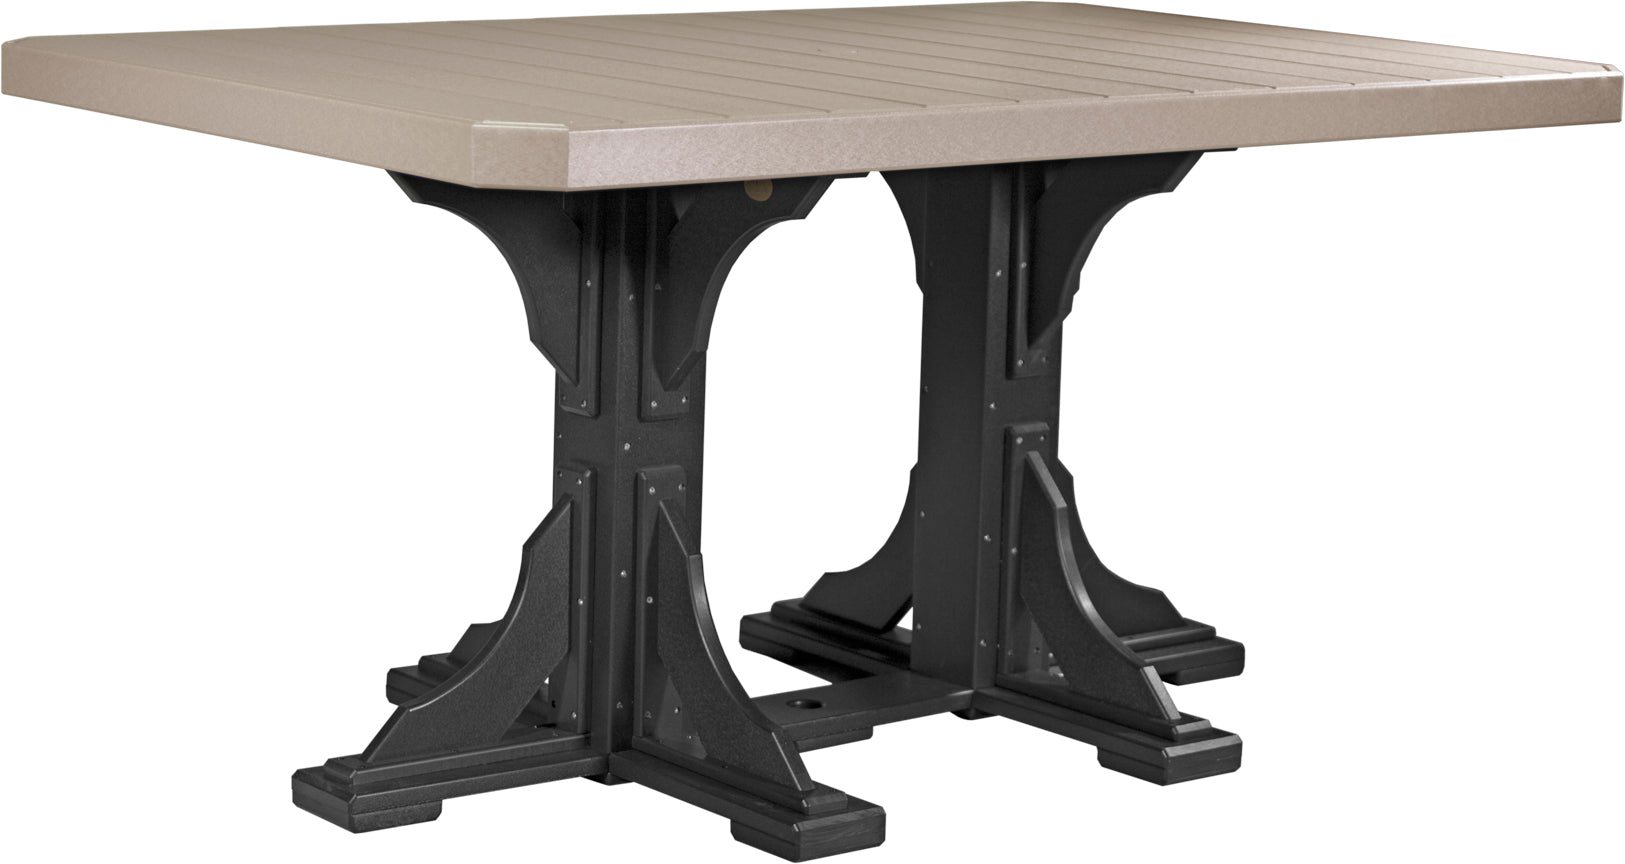 LuxCraft 4' x 6' Rectangular Table - Counter Height